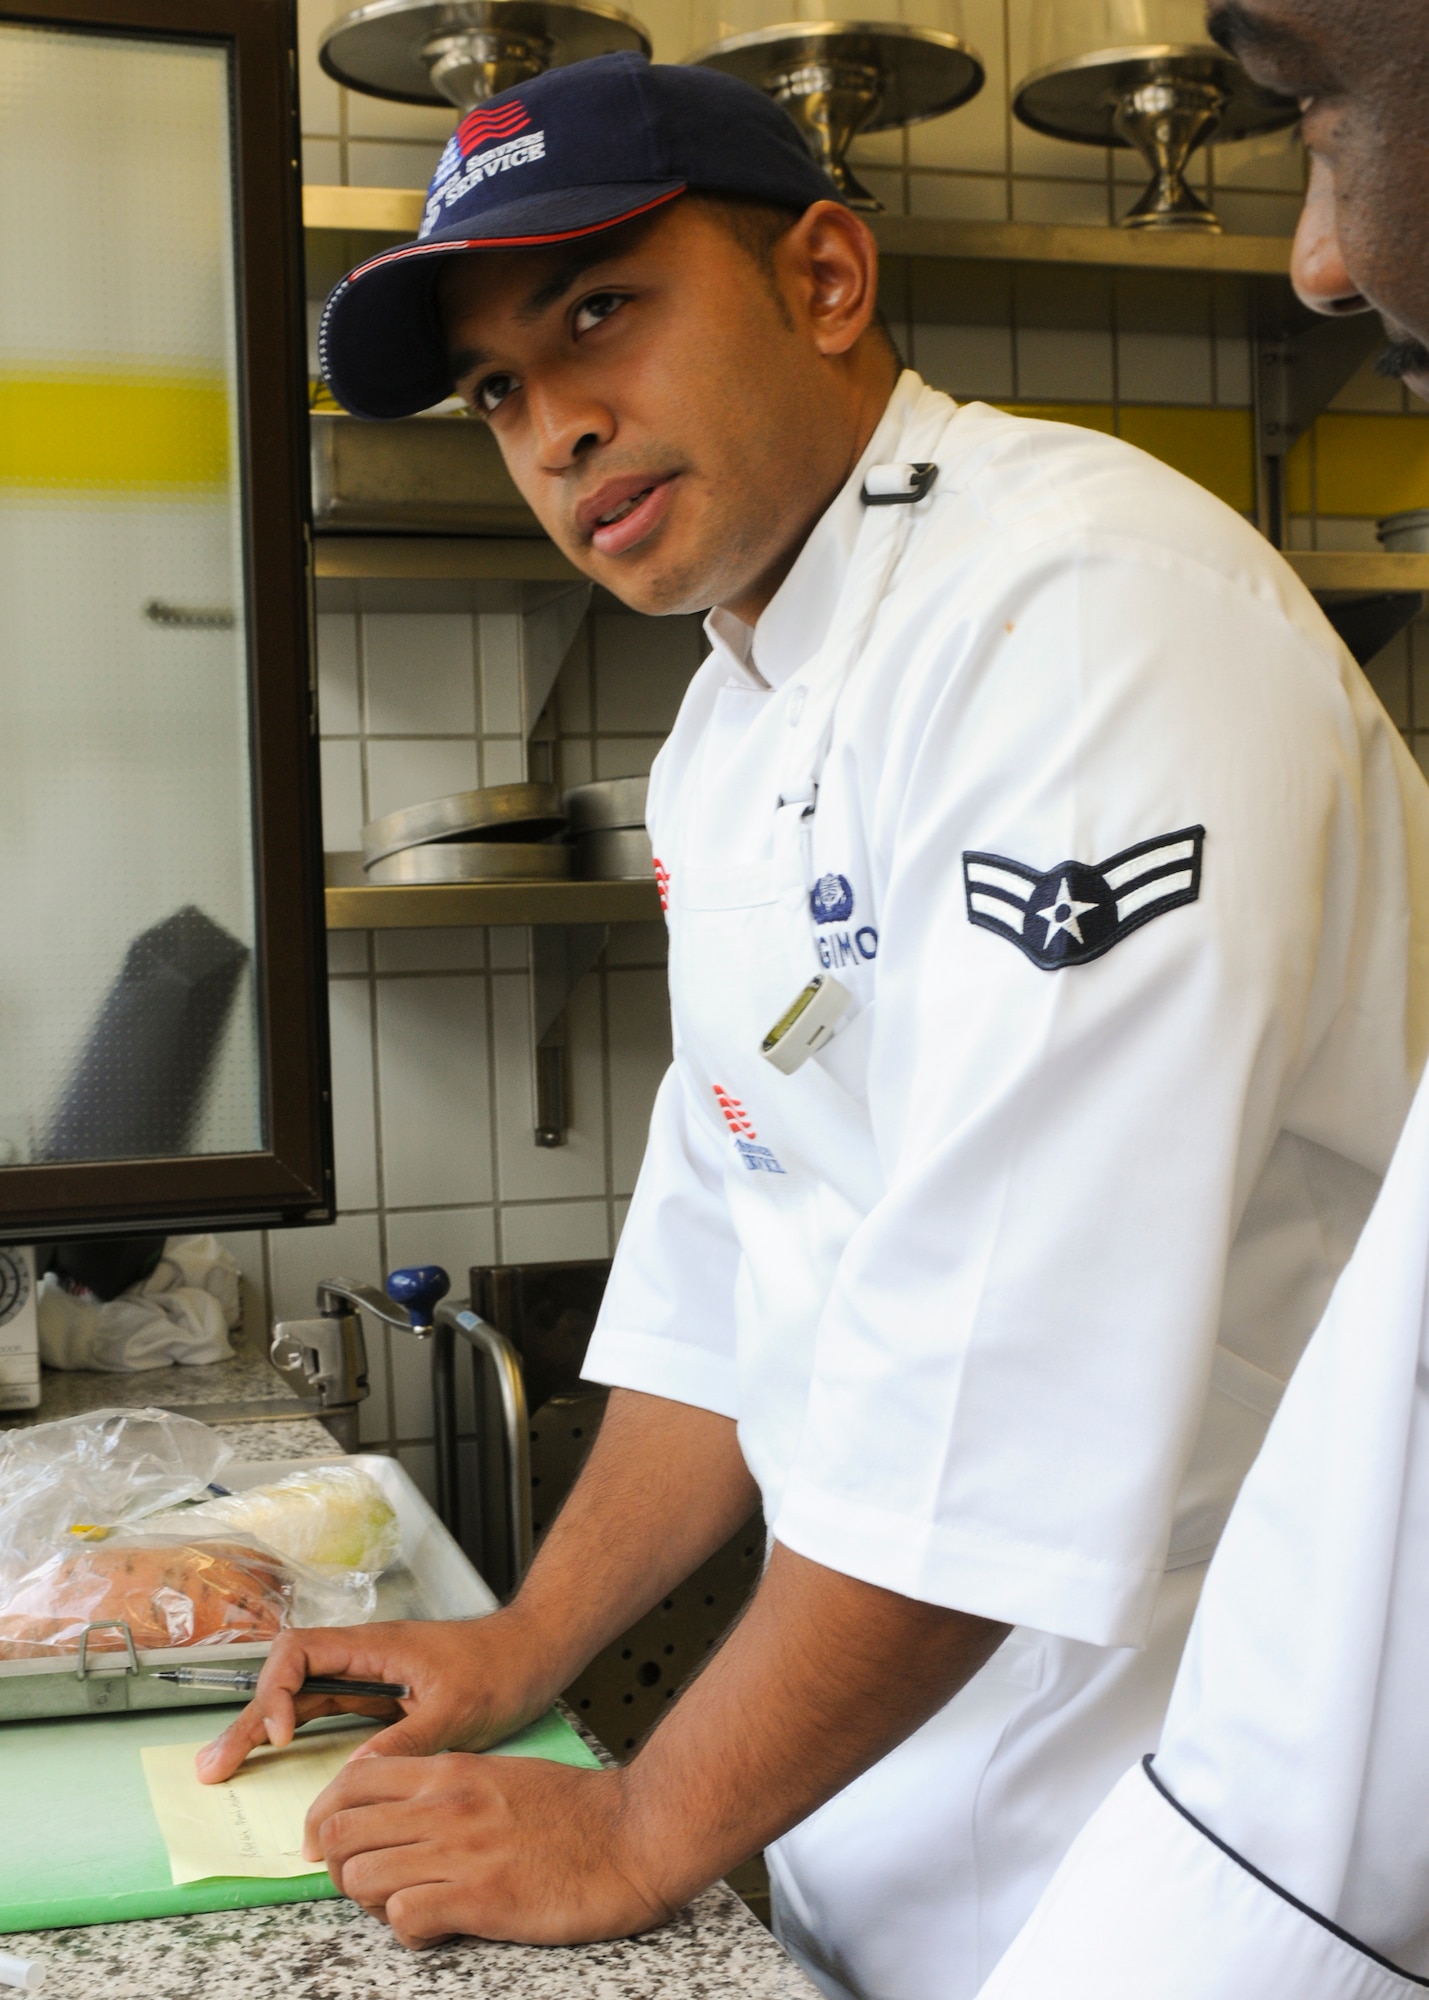 SPANGDAHLEM AIR BASE, Germany -- Airman 1st Class Jason Sugimoto, 52nd Force Support Squadron food service journeyman, plans his menu for the U.S. Air Forces in Europe Iron Chef Competition July 30 at Kapaun Air Station, Germany. Airman Sugimoto was one of seven contestants to compete in the competition. Airman Sugimoto placed runner-up for the competition and was selected to attend the Culinary Institute of America in Napa Valley, California for training along with Iron Chef winner Staff Sgt. Kiana Mobley, 48th Force Support Squadron, Royal Air Force Lakenheath. (U.S. Air Force photo by Airman 1st Class Nathanael Callon)